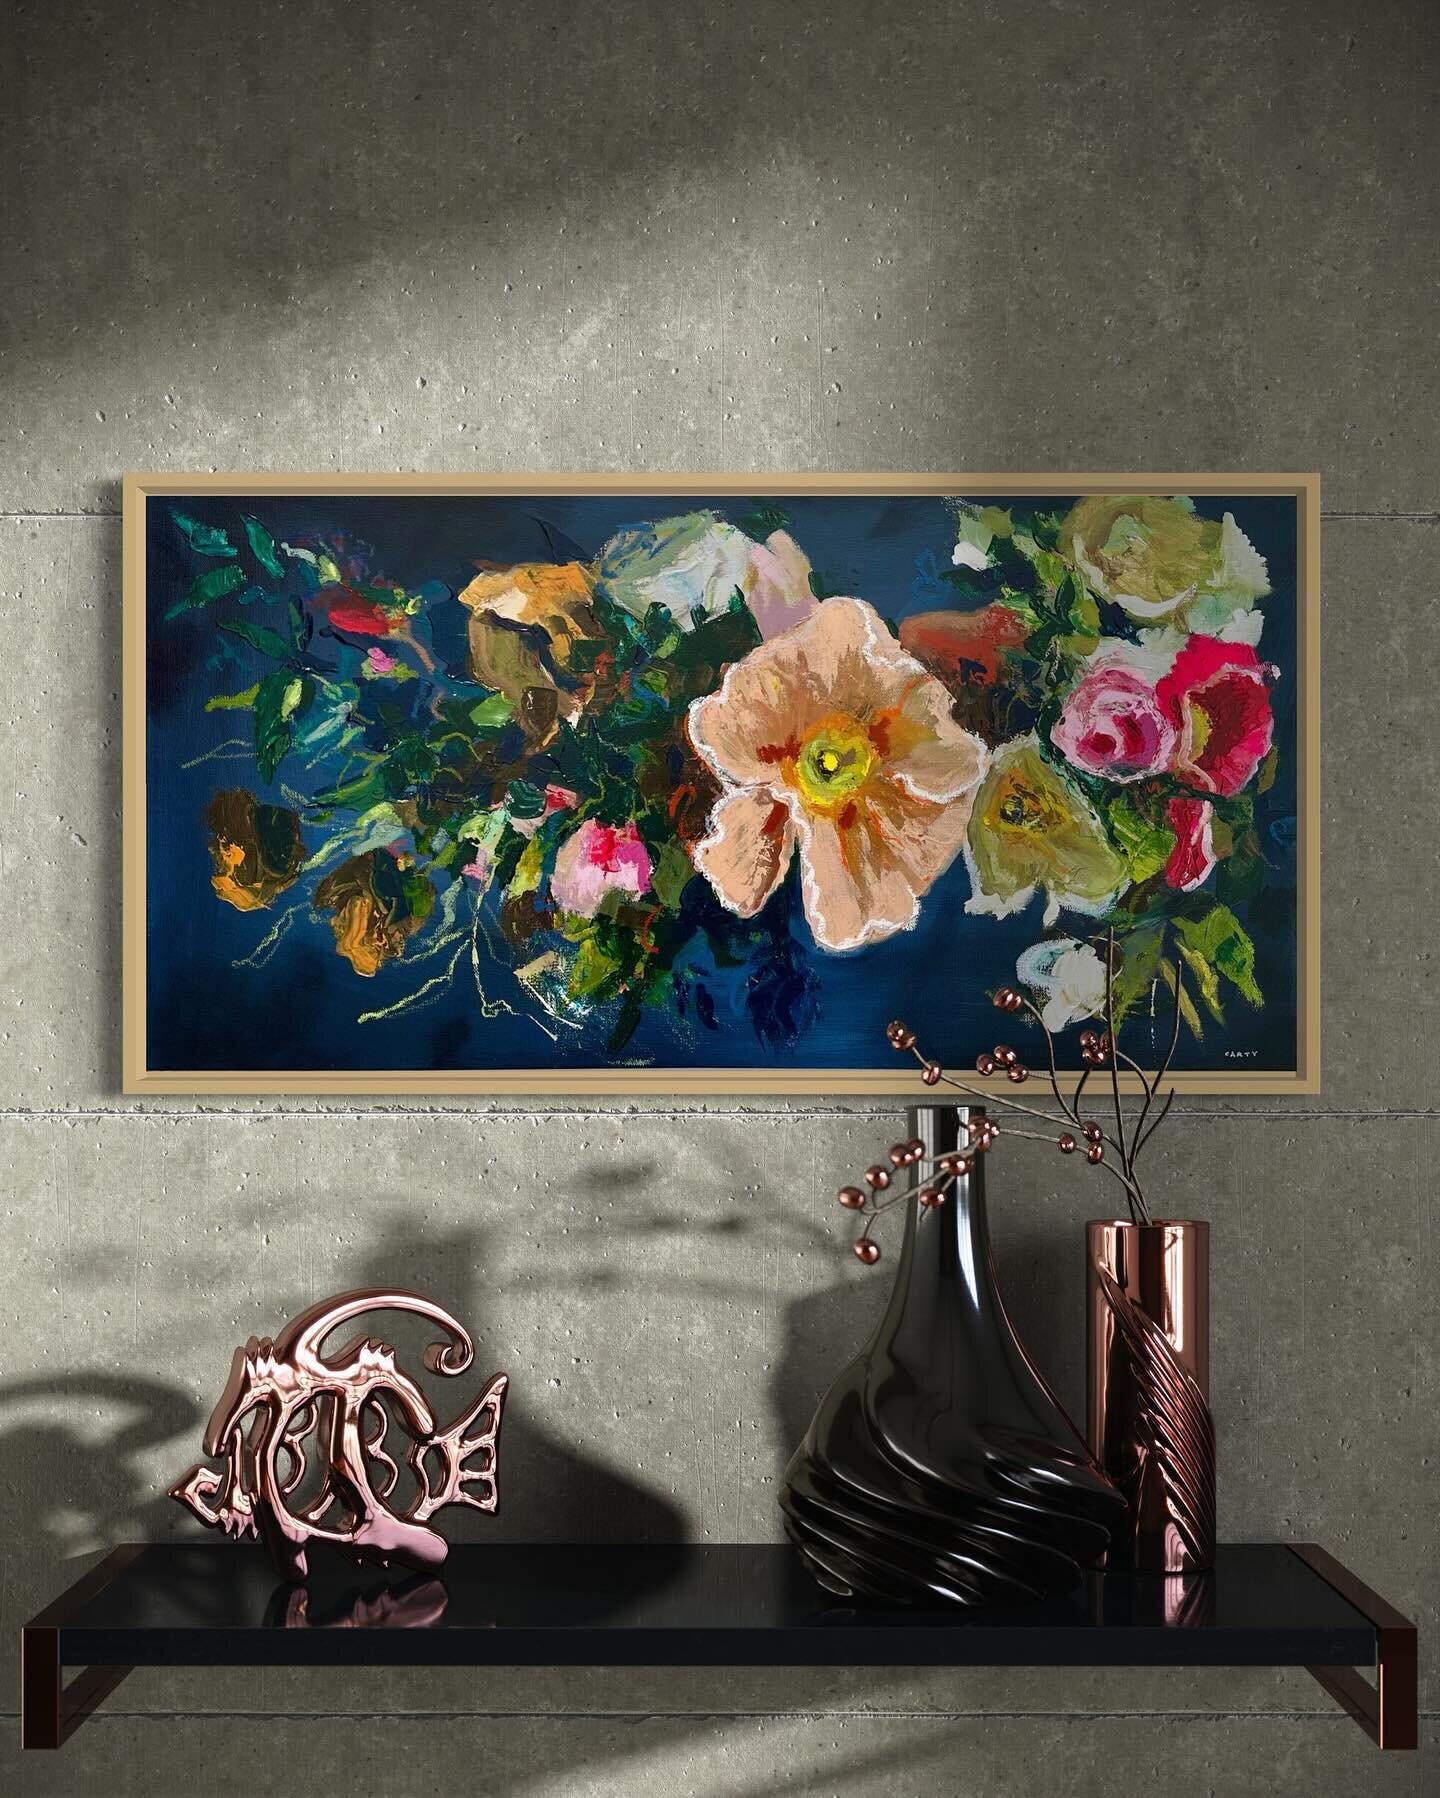 This stunning collection of moody abstract florals inspired by old Dutch still life paintings is almost complete and ready for release to you! I have two more frames on the way as we speak and then I can finish photographing everything. The lovely pe